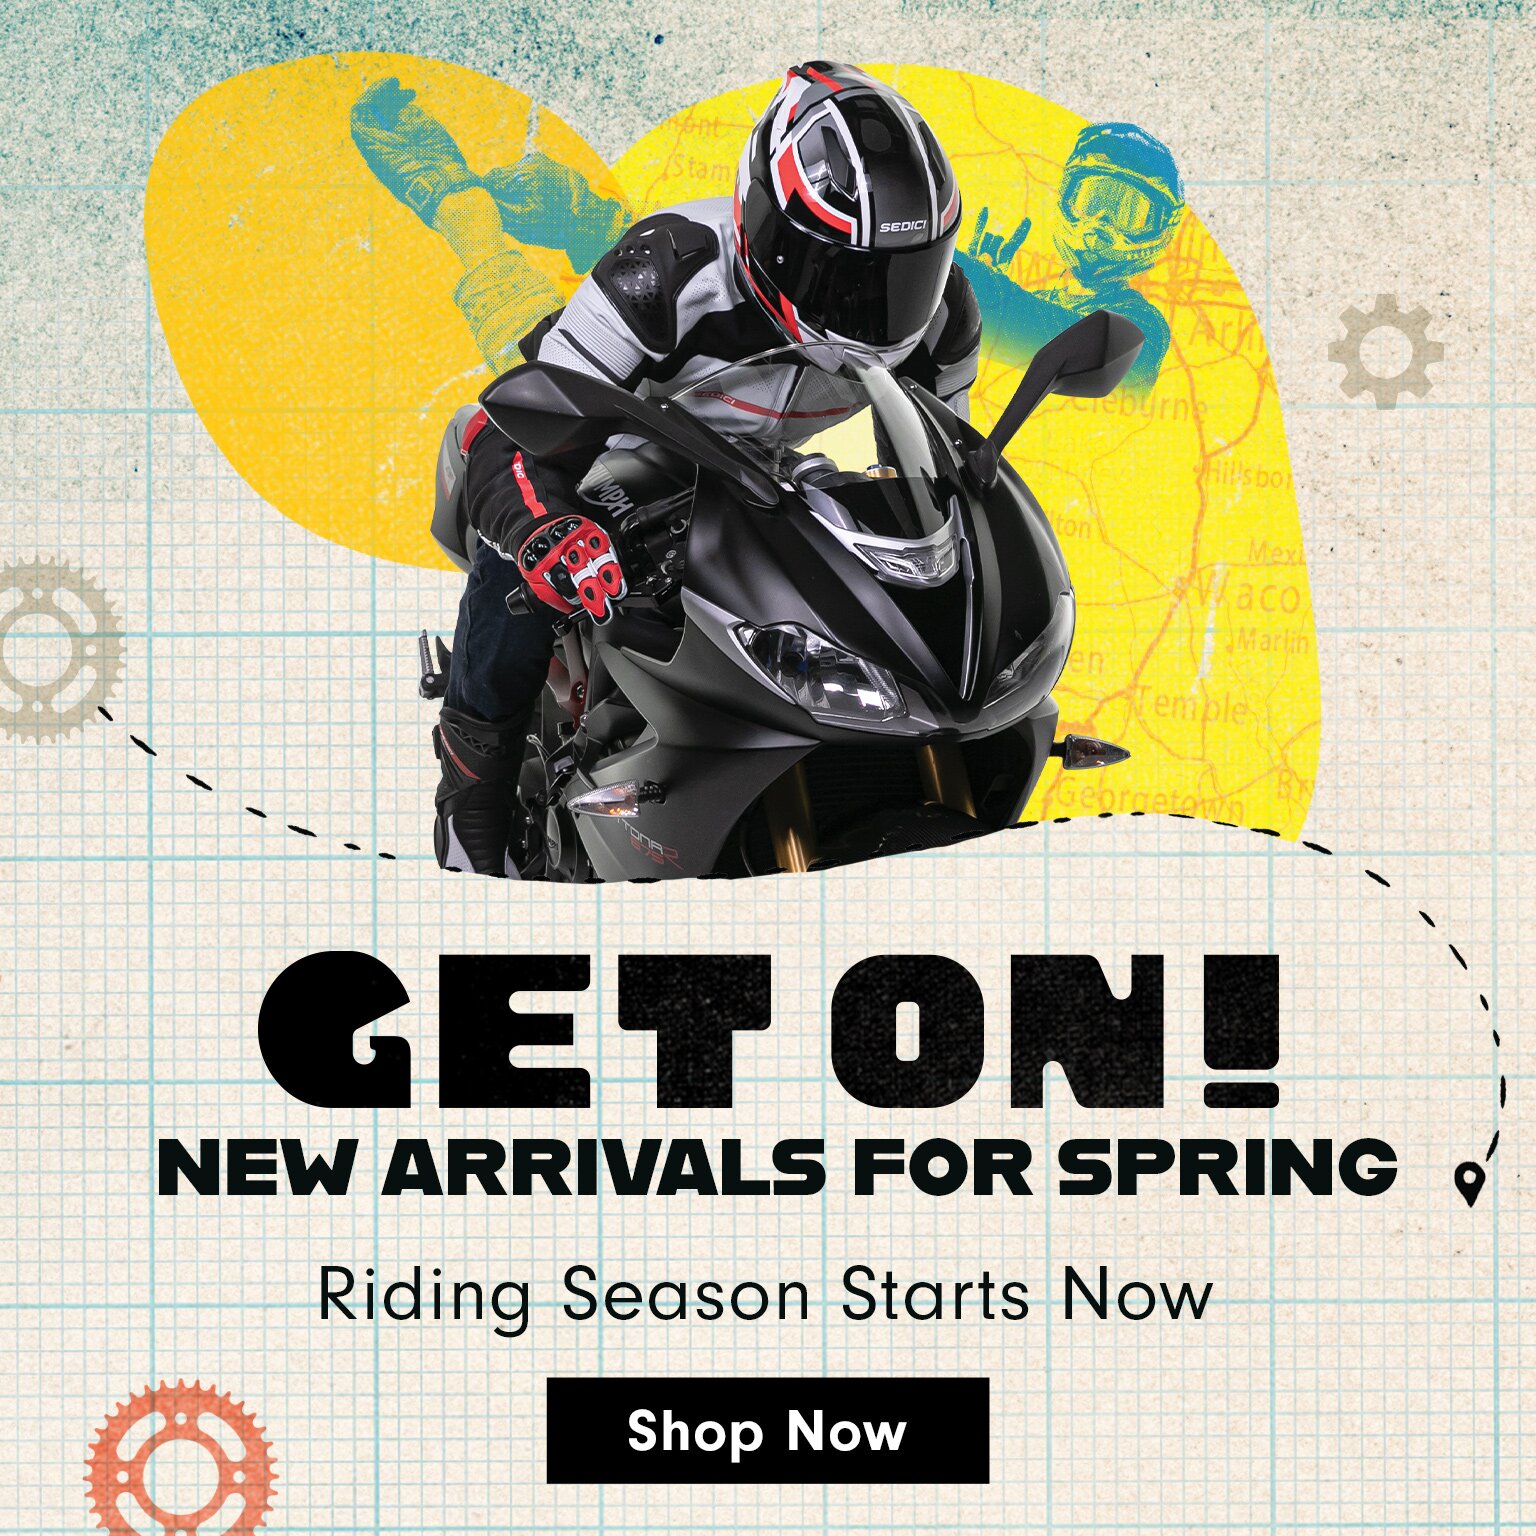 cycle gear store near me